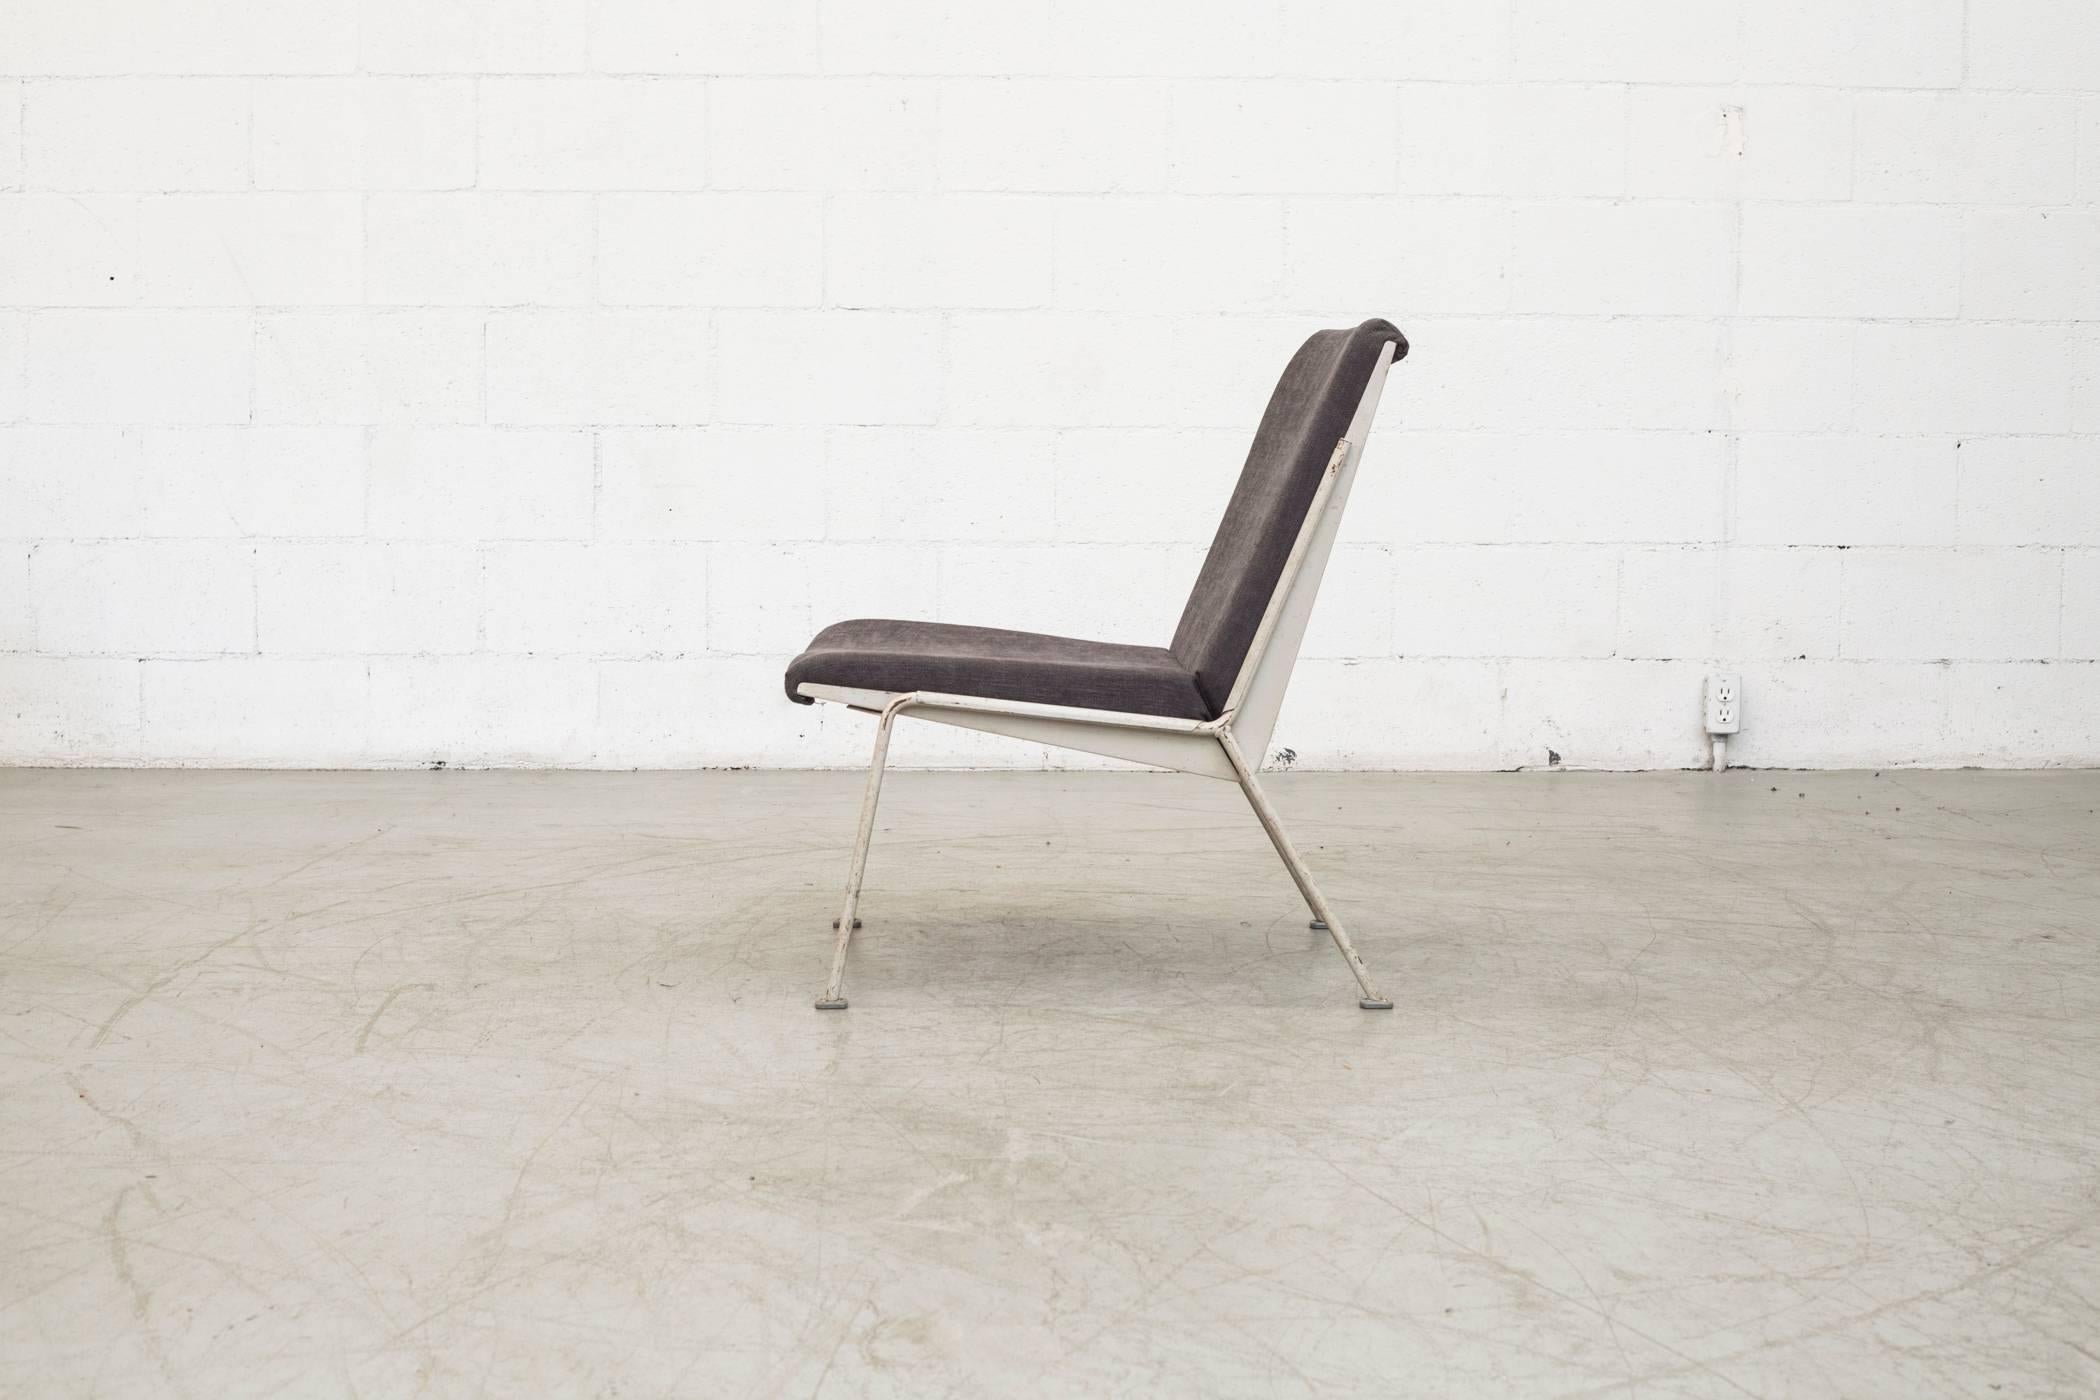 Light grey enameled metal frame in original condition with visible wear and use and new charcoal grey upholstery, designed by Wim Rietveld for Ahrend de Cirkel.